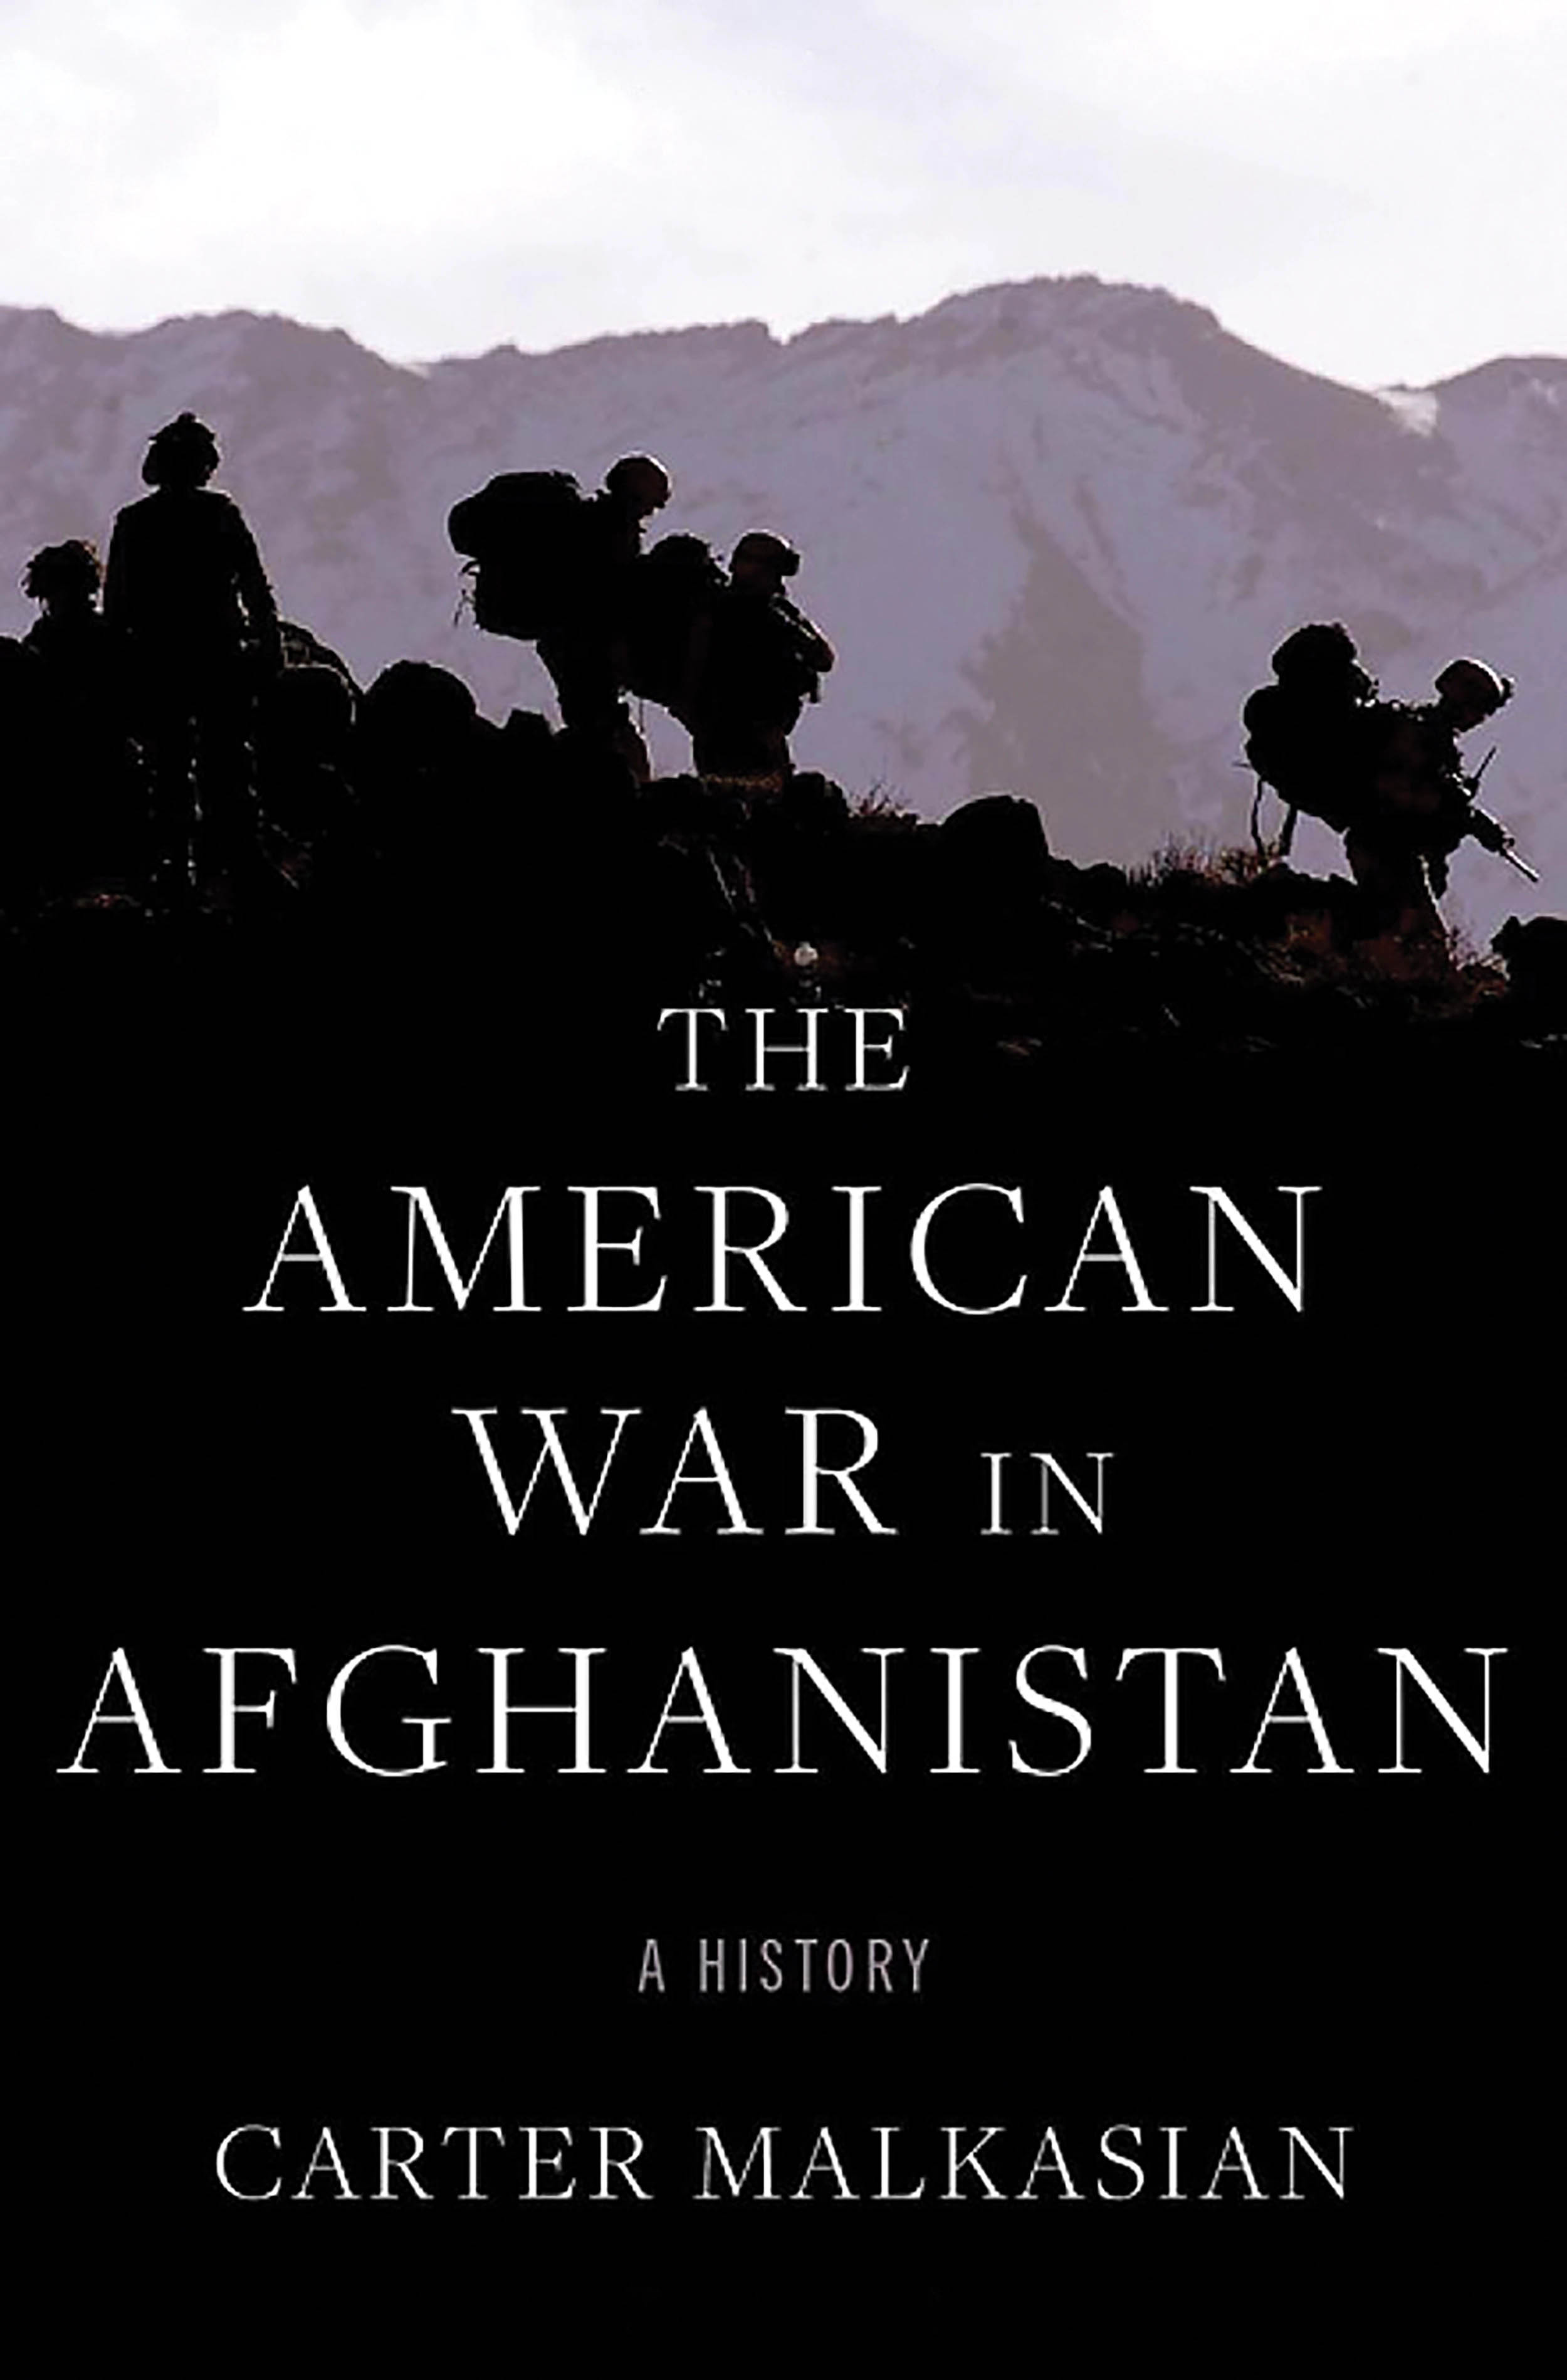 The American War in Aghanistan